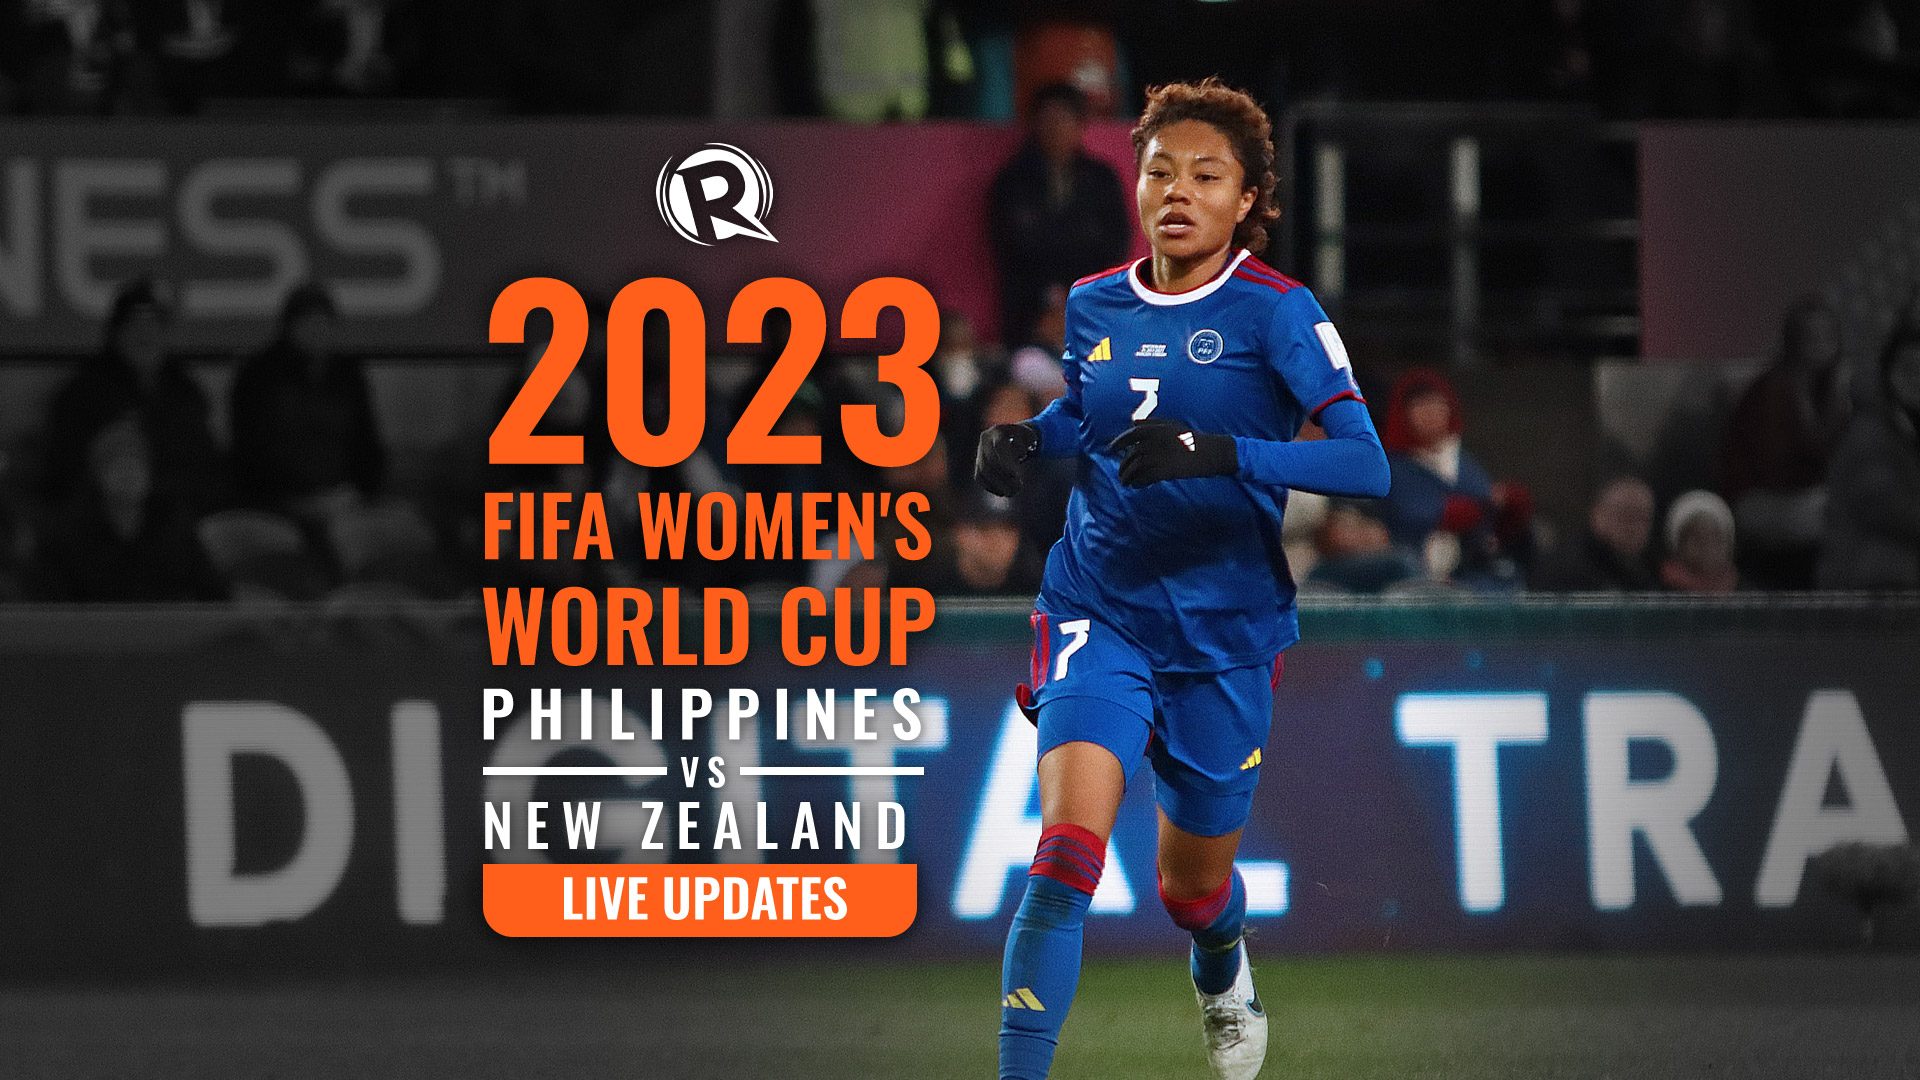 HIGHLIGHTS Philippines vs New Zealand FIFA Women’s World Cup 2023